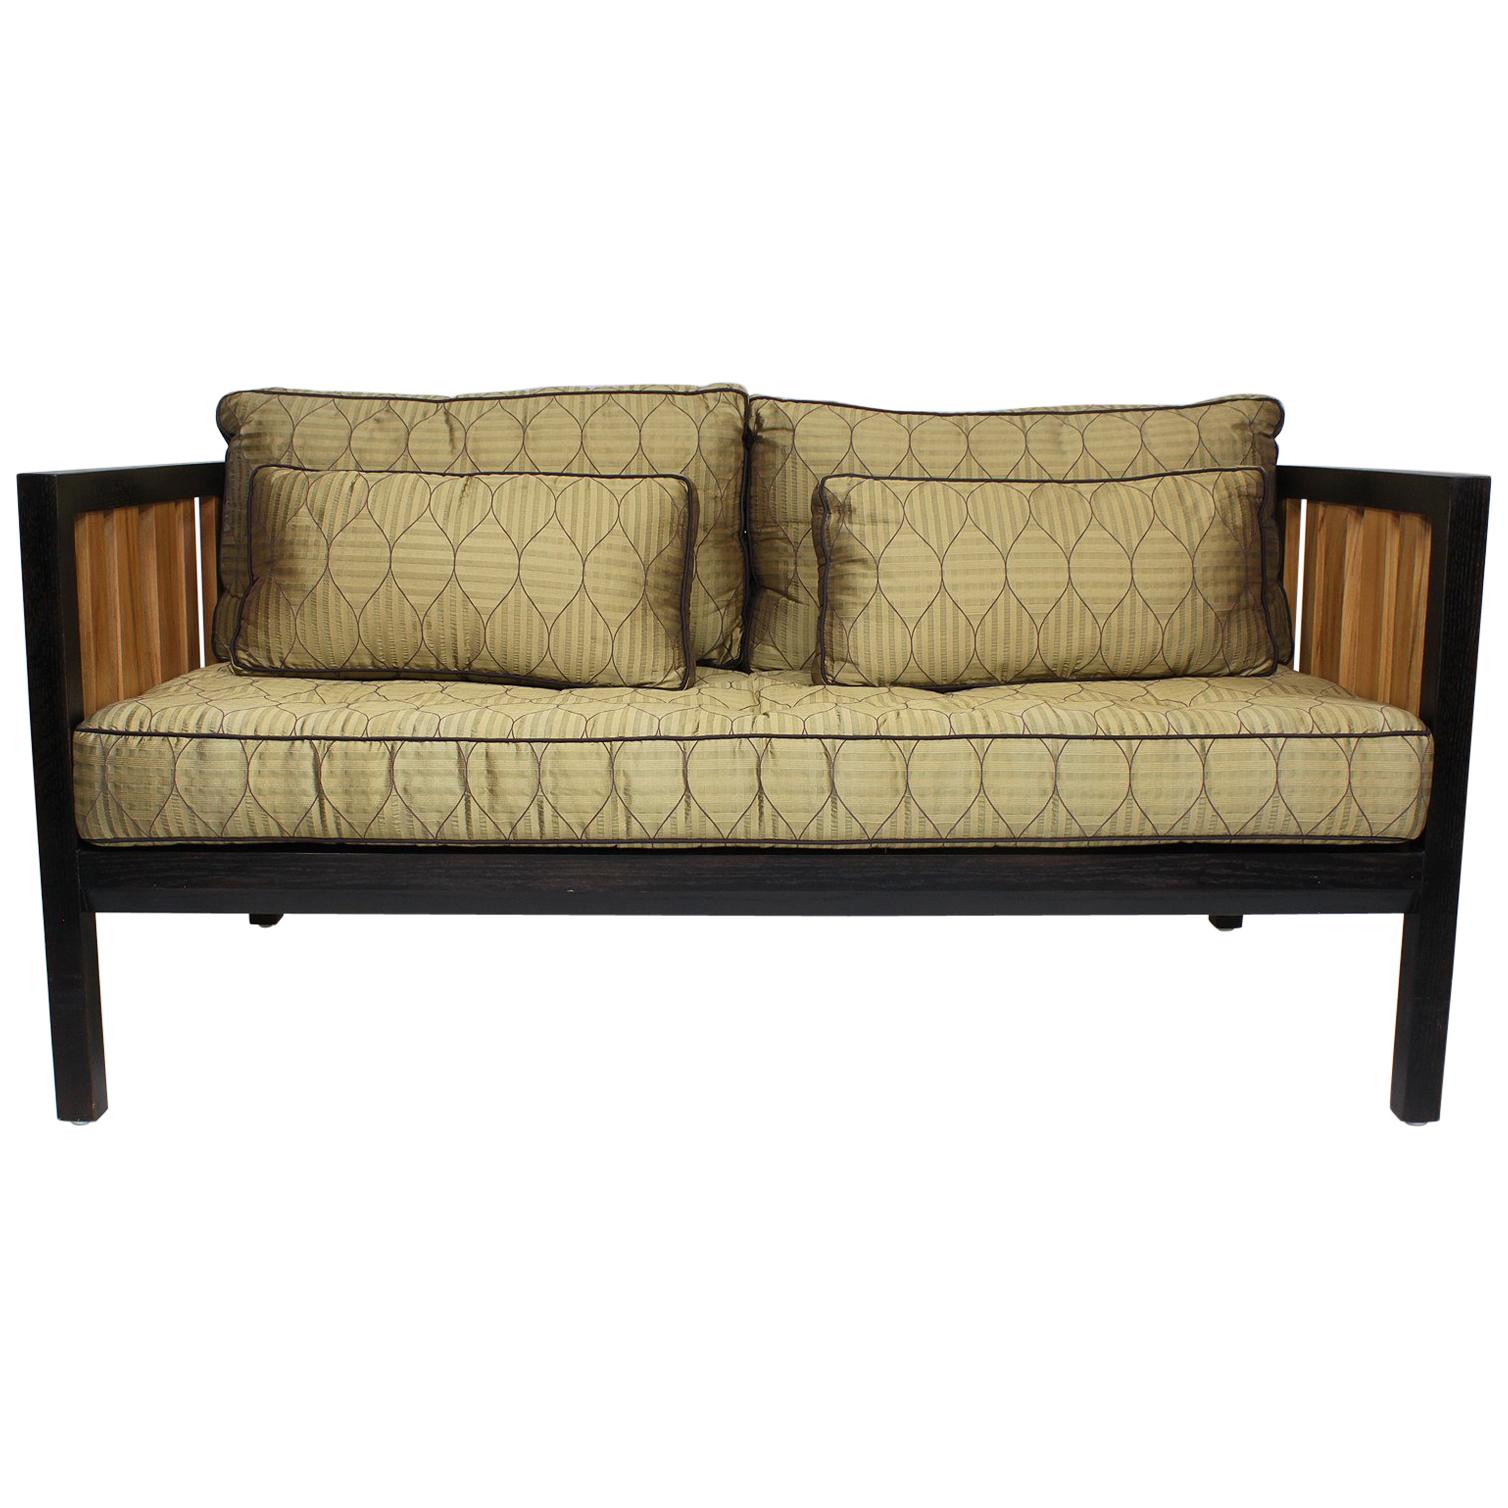 Mahogany and Ash Loveseat, Settee after a Design by Edward Wormley for Dunbar